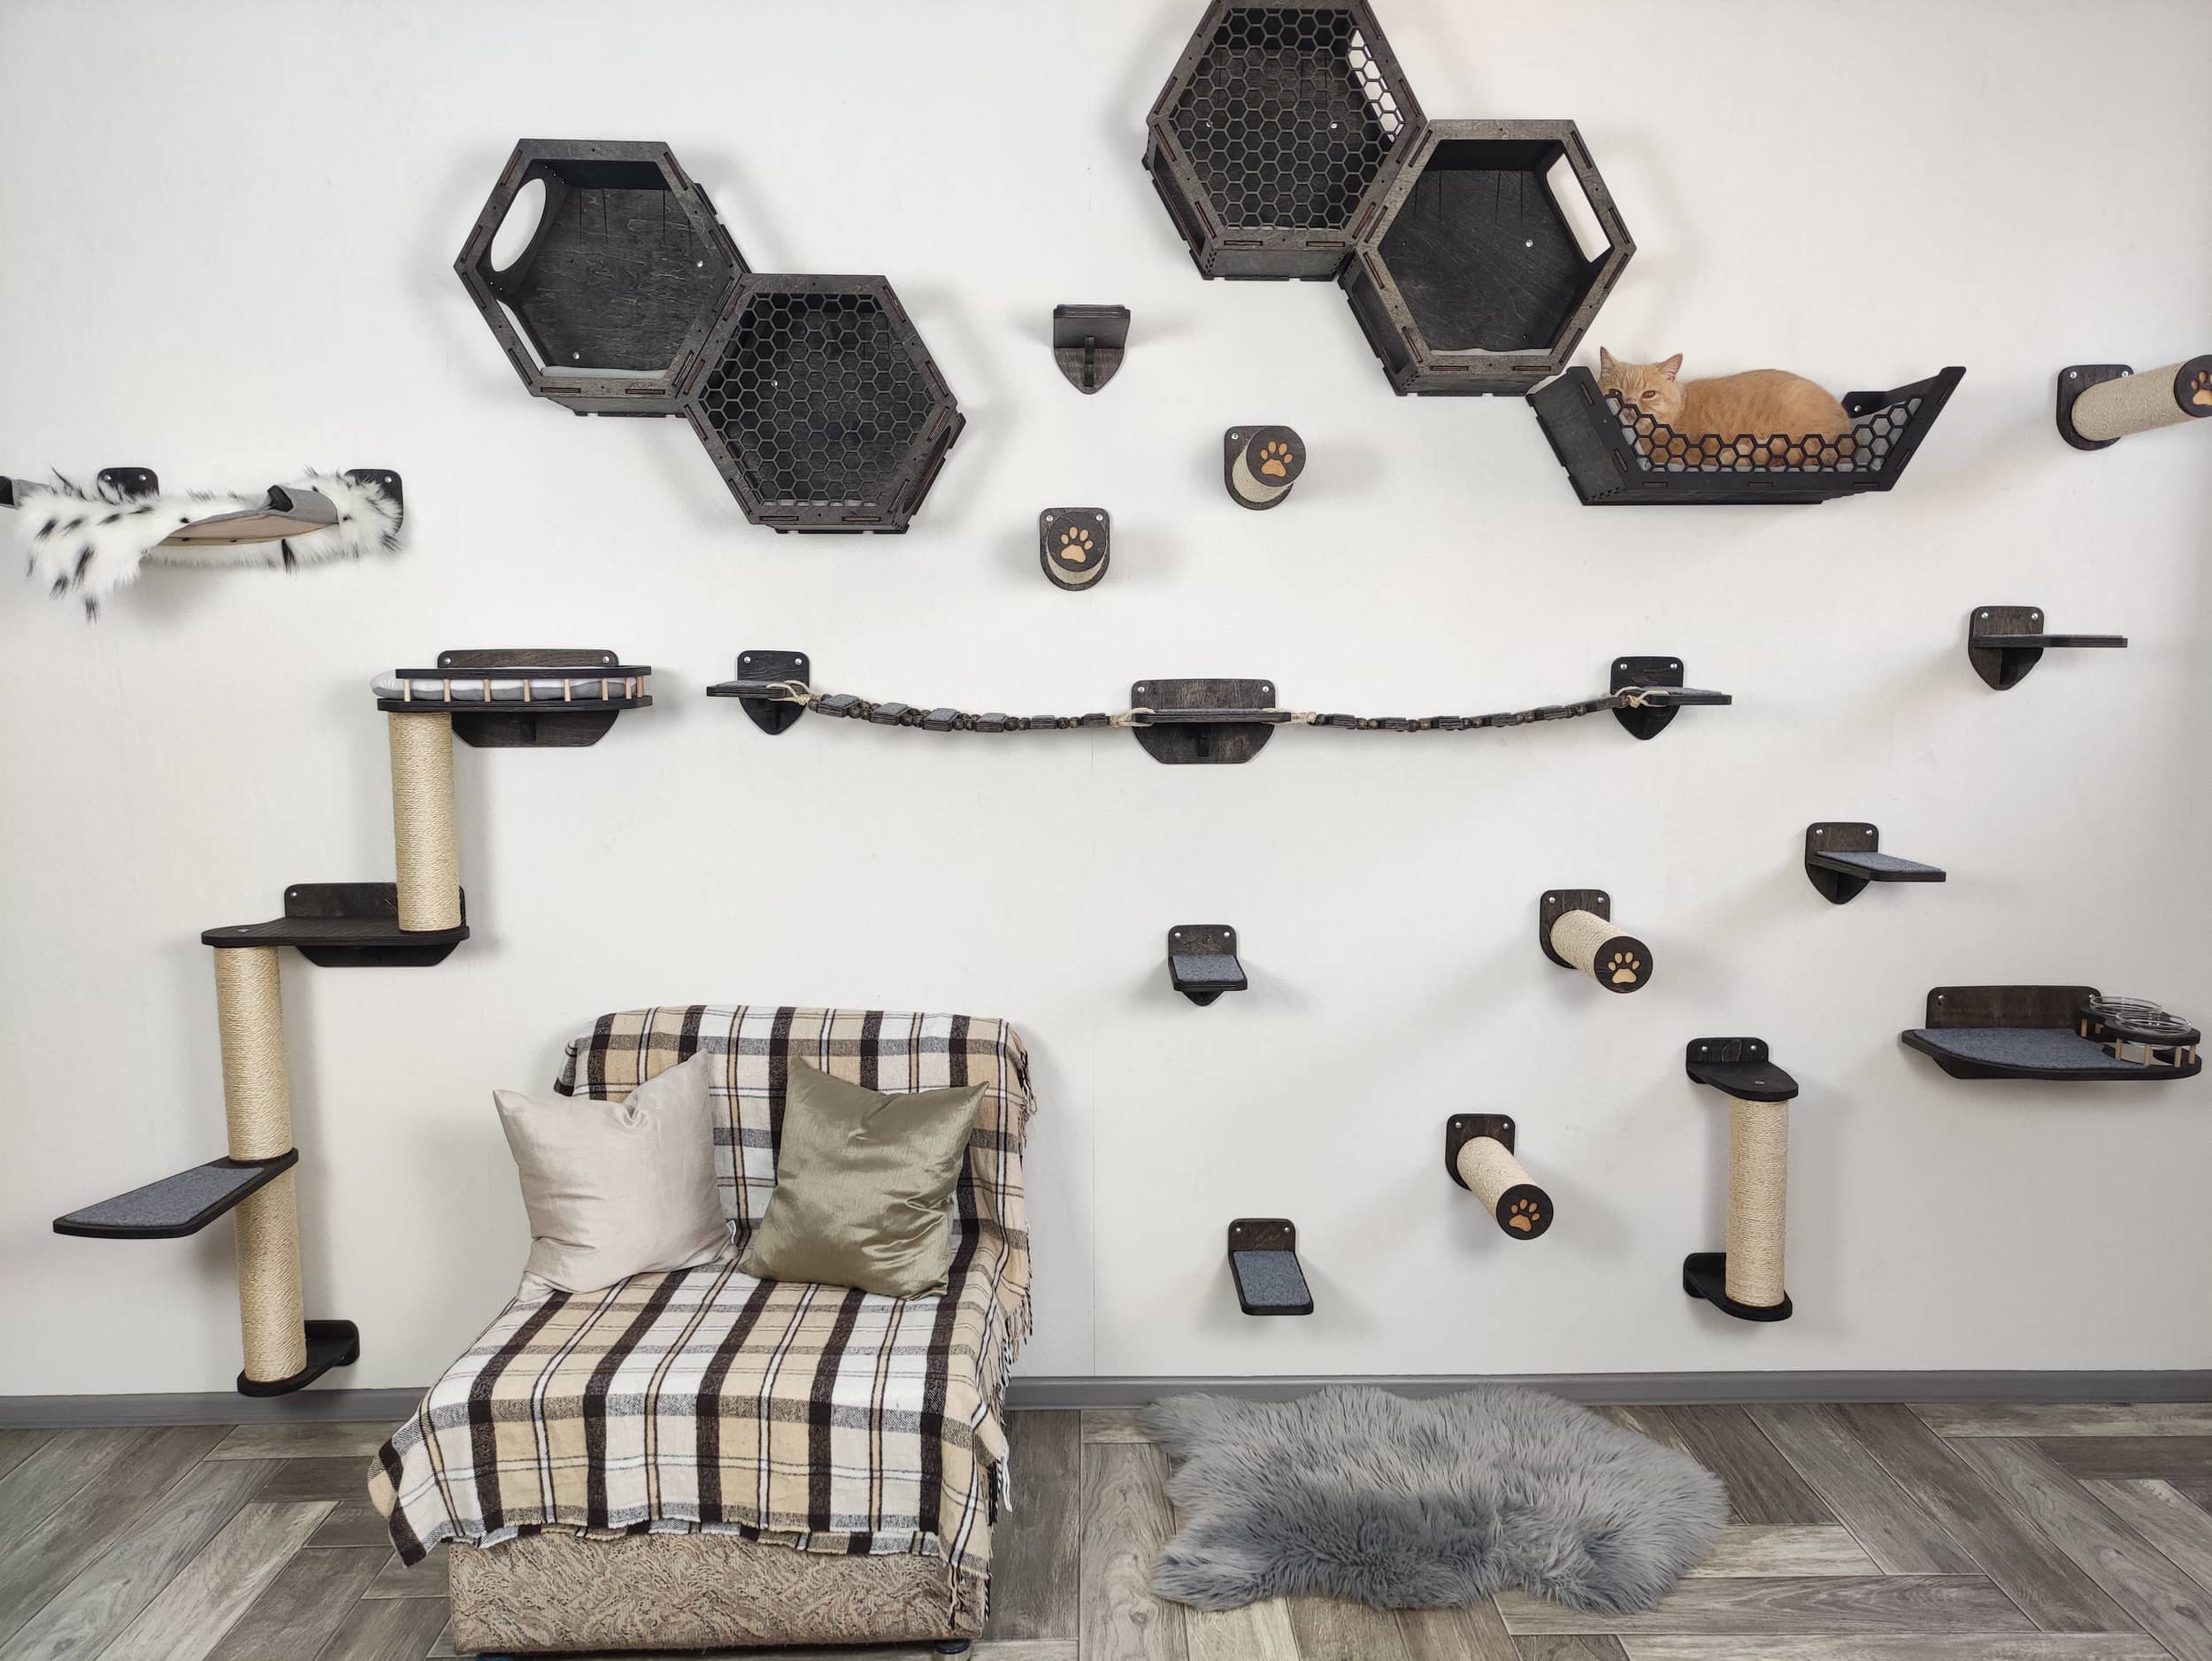 Large set of wall mounted cat shelves